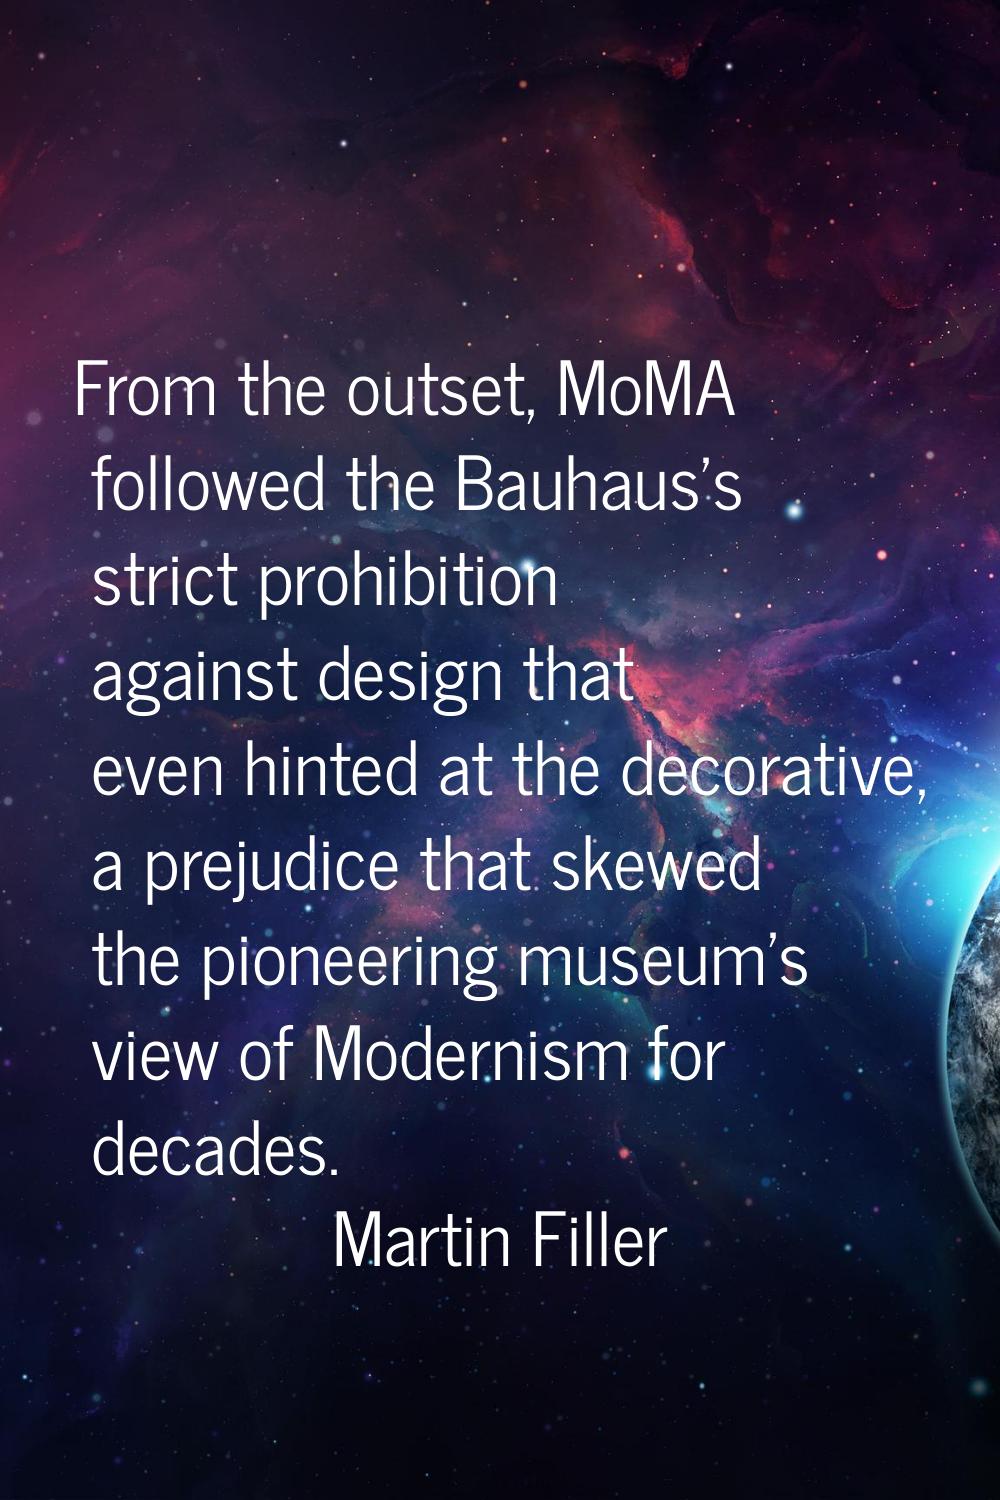 From the outset, MoMA followed the Bauhaus's strict prohibition against design that even hinted at 